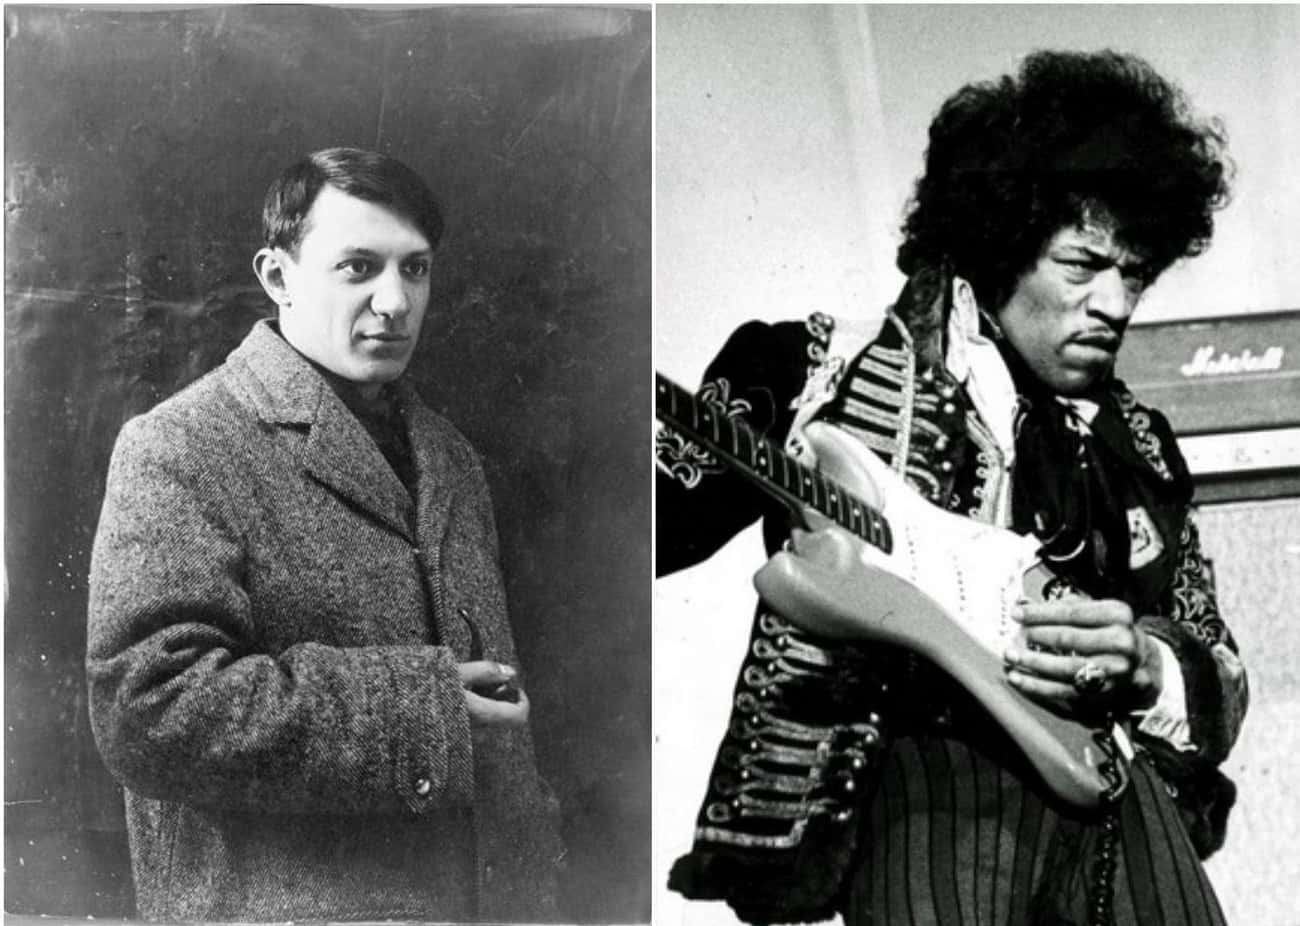 Pablo Picasso Outlived Jimi Hendrix